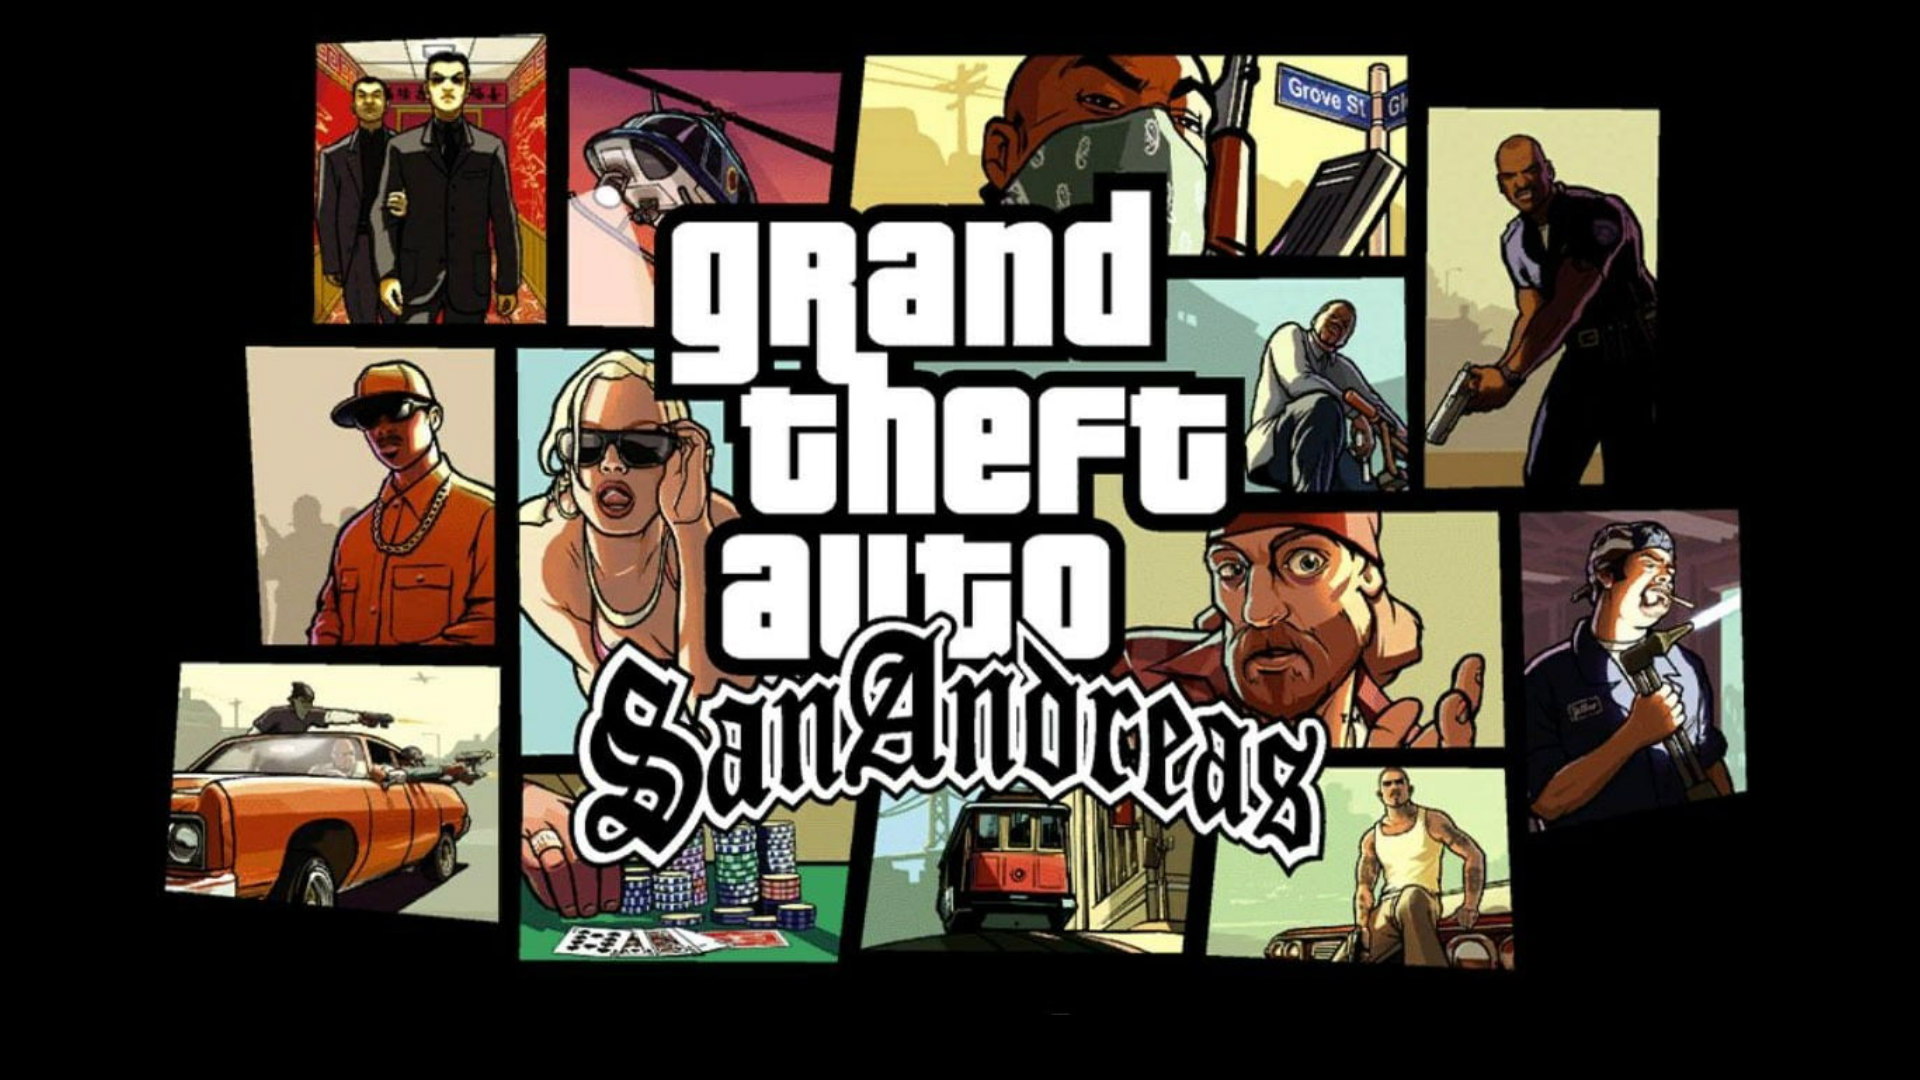 Grand Theft Auto: San Andreas PC Game Review